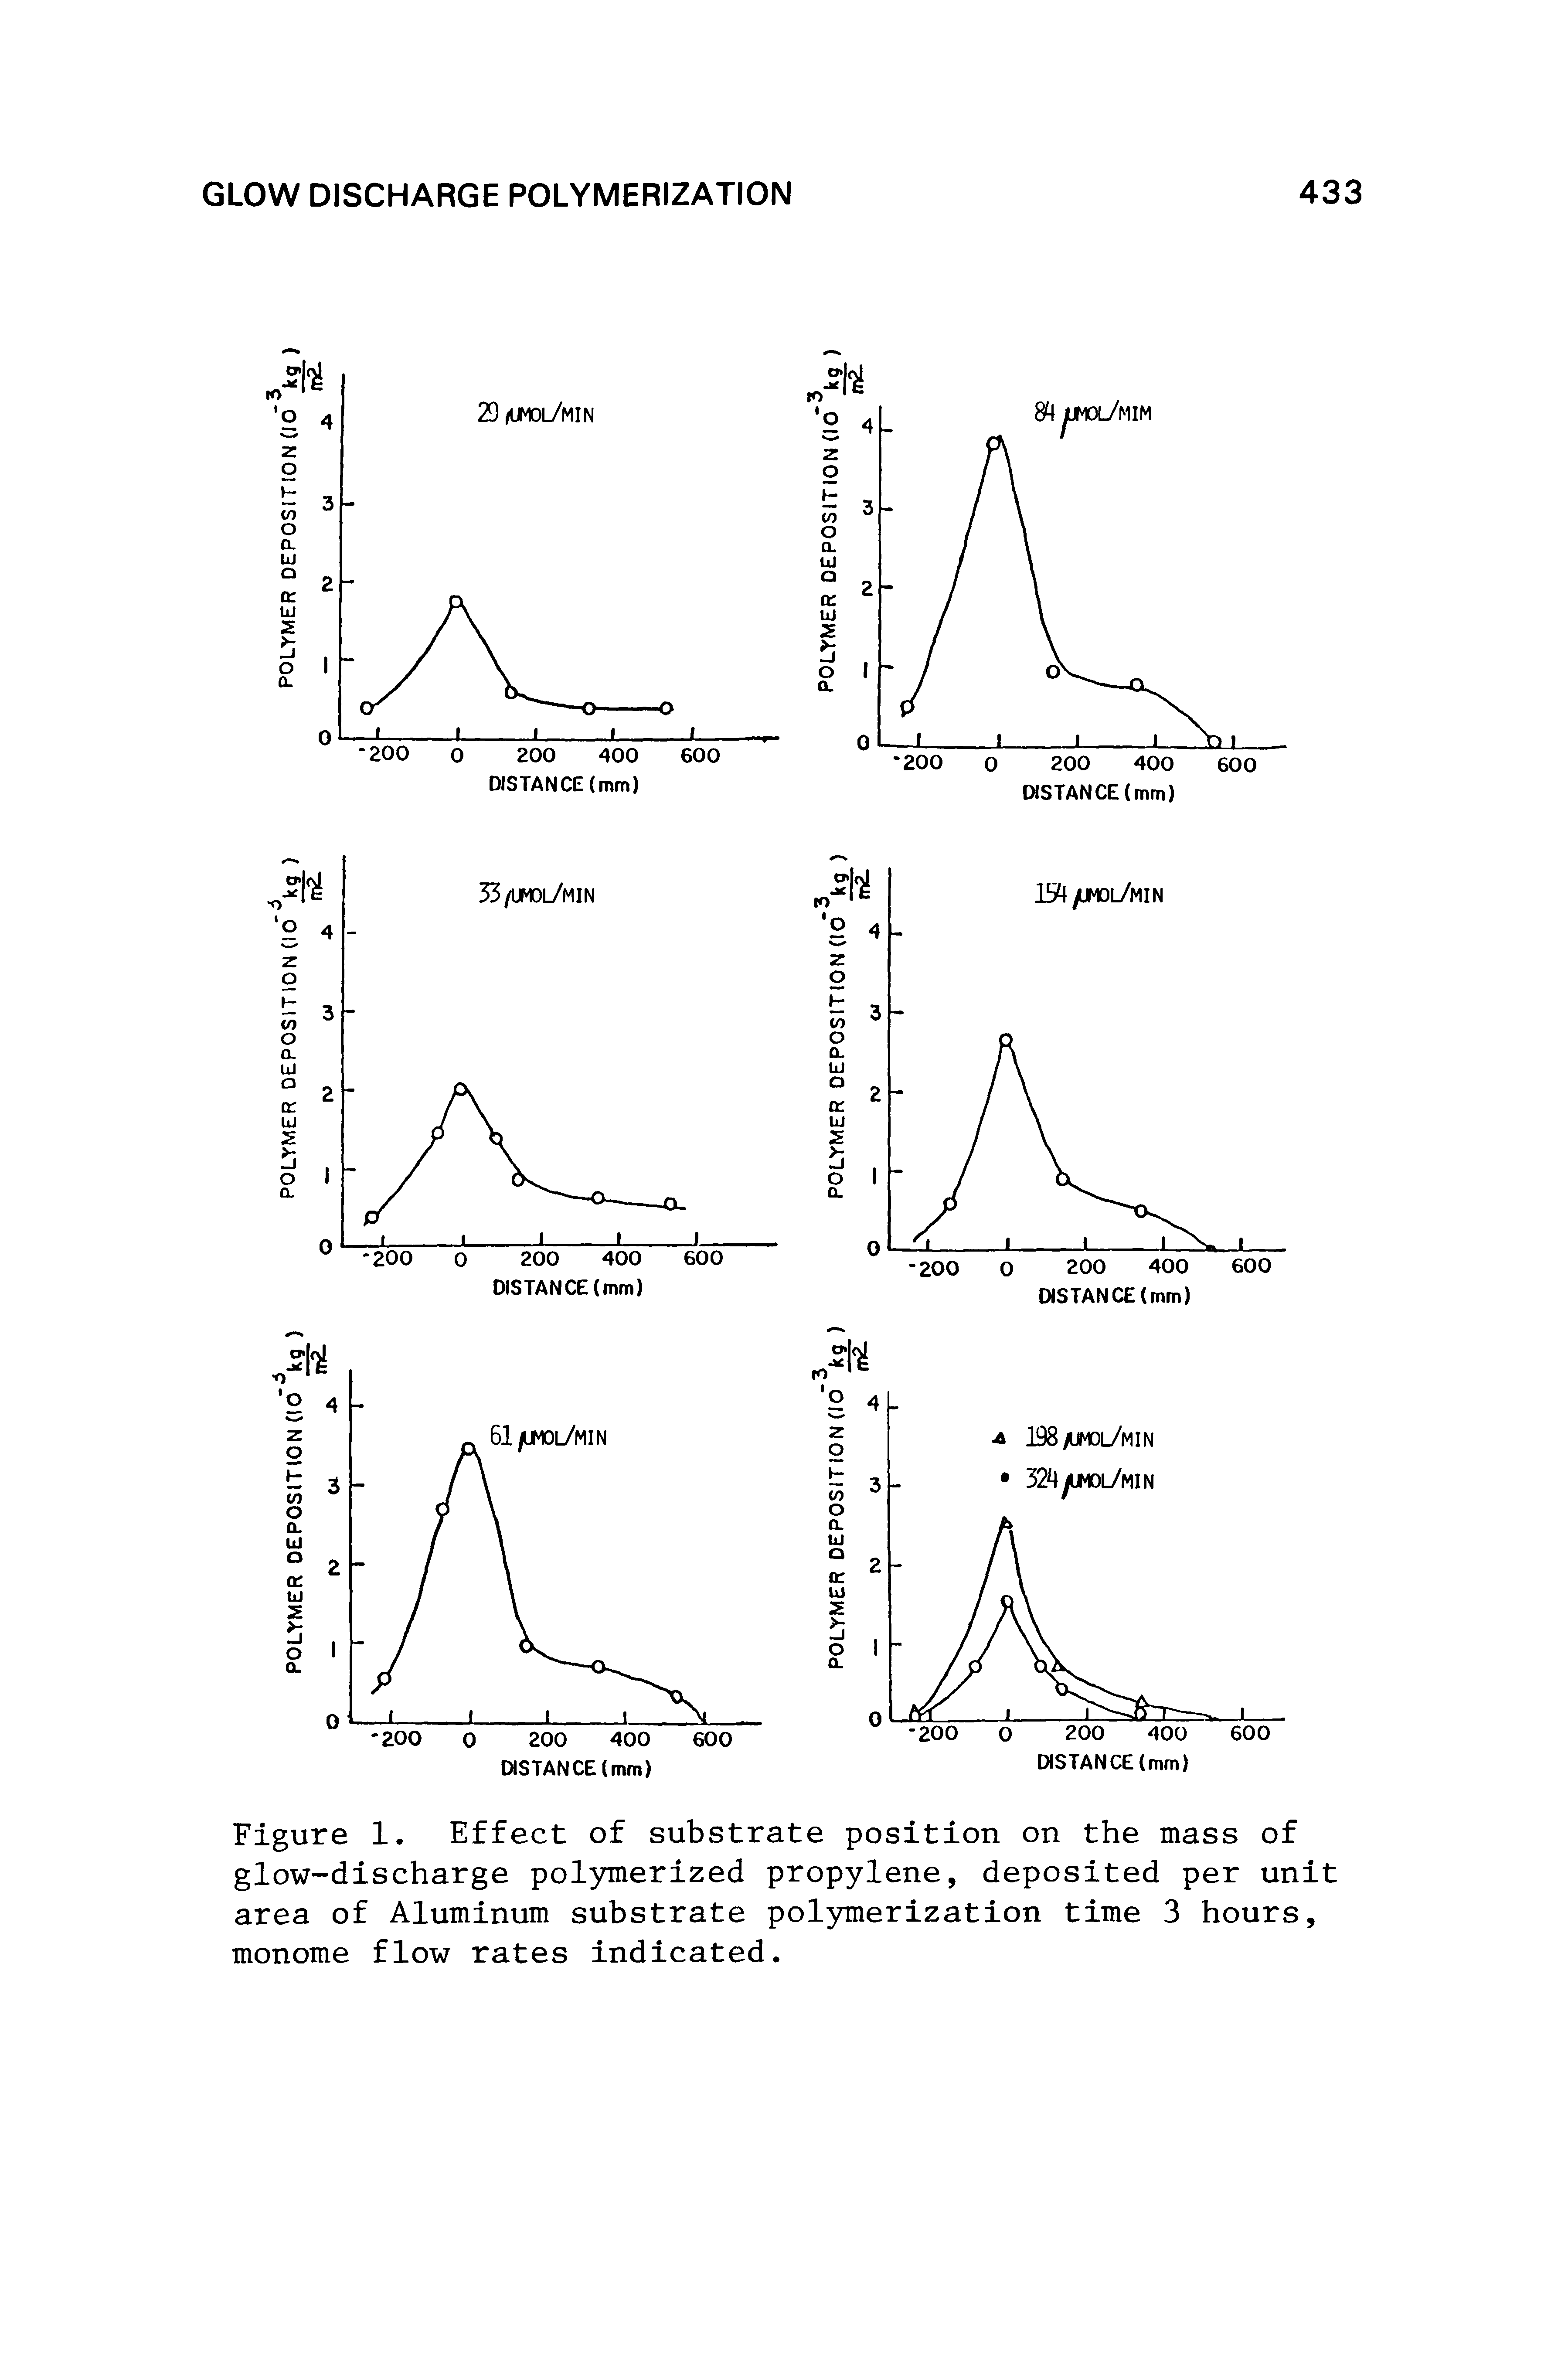 Figure 1. Effect of substrate position on the mass of glow-discharge polymerized propylene, deposited per unit area of Aluminum substrate polymerization time 3 hours, monome flow rates indicated.